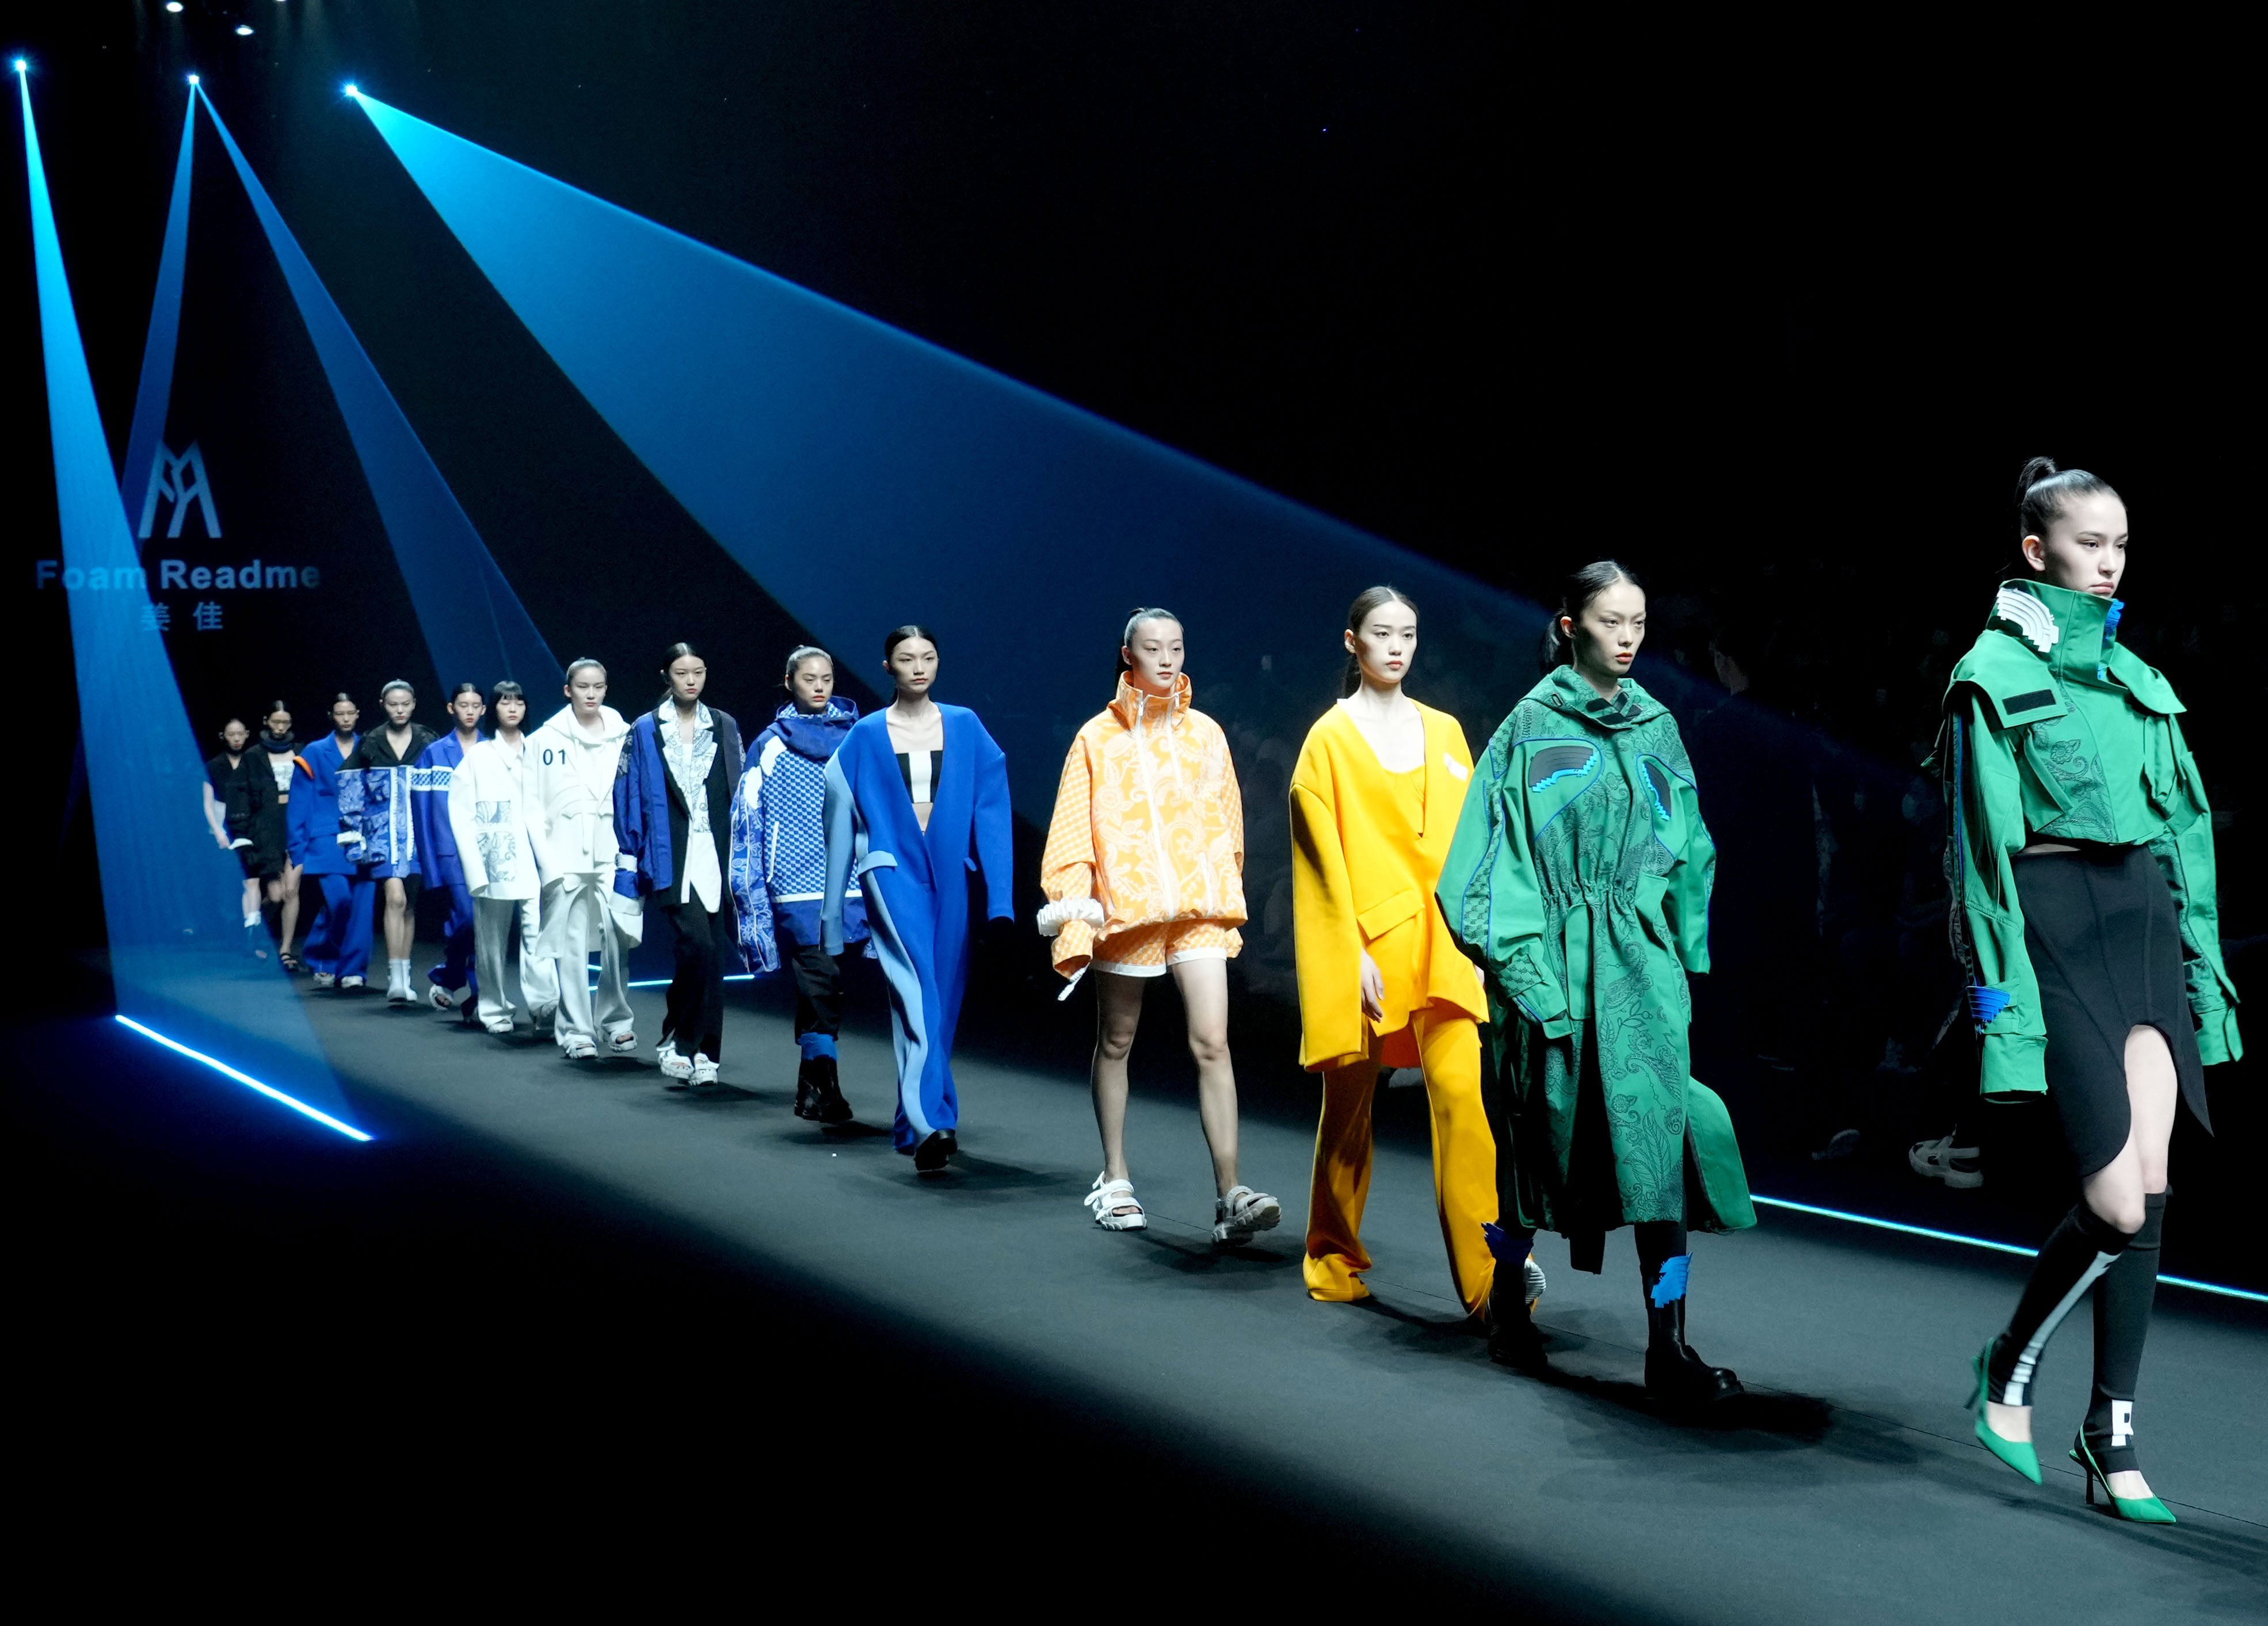 A Splashy Entrance by Rihanna Puts Chinese Designers in the